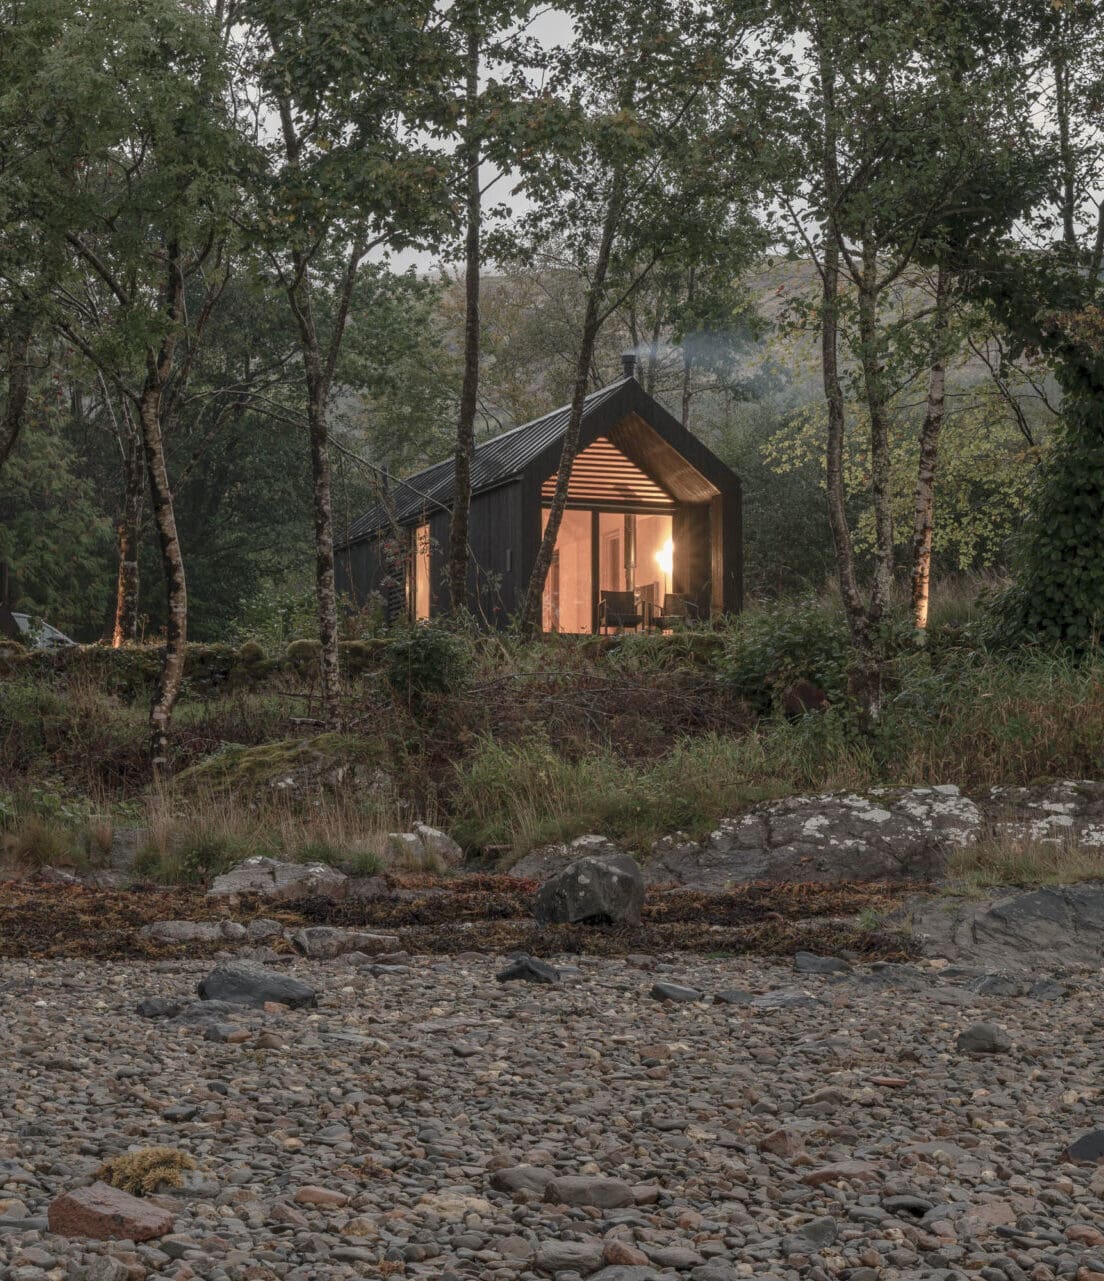 Holidays rentals are adapting for digital nomads | Kip Hideaways Loch Fyne retreats: a corrugated iron cabin with floor-to-ceiling windows is lit from within in a remote forest